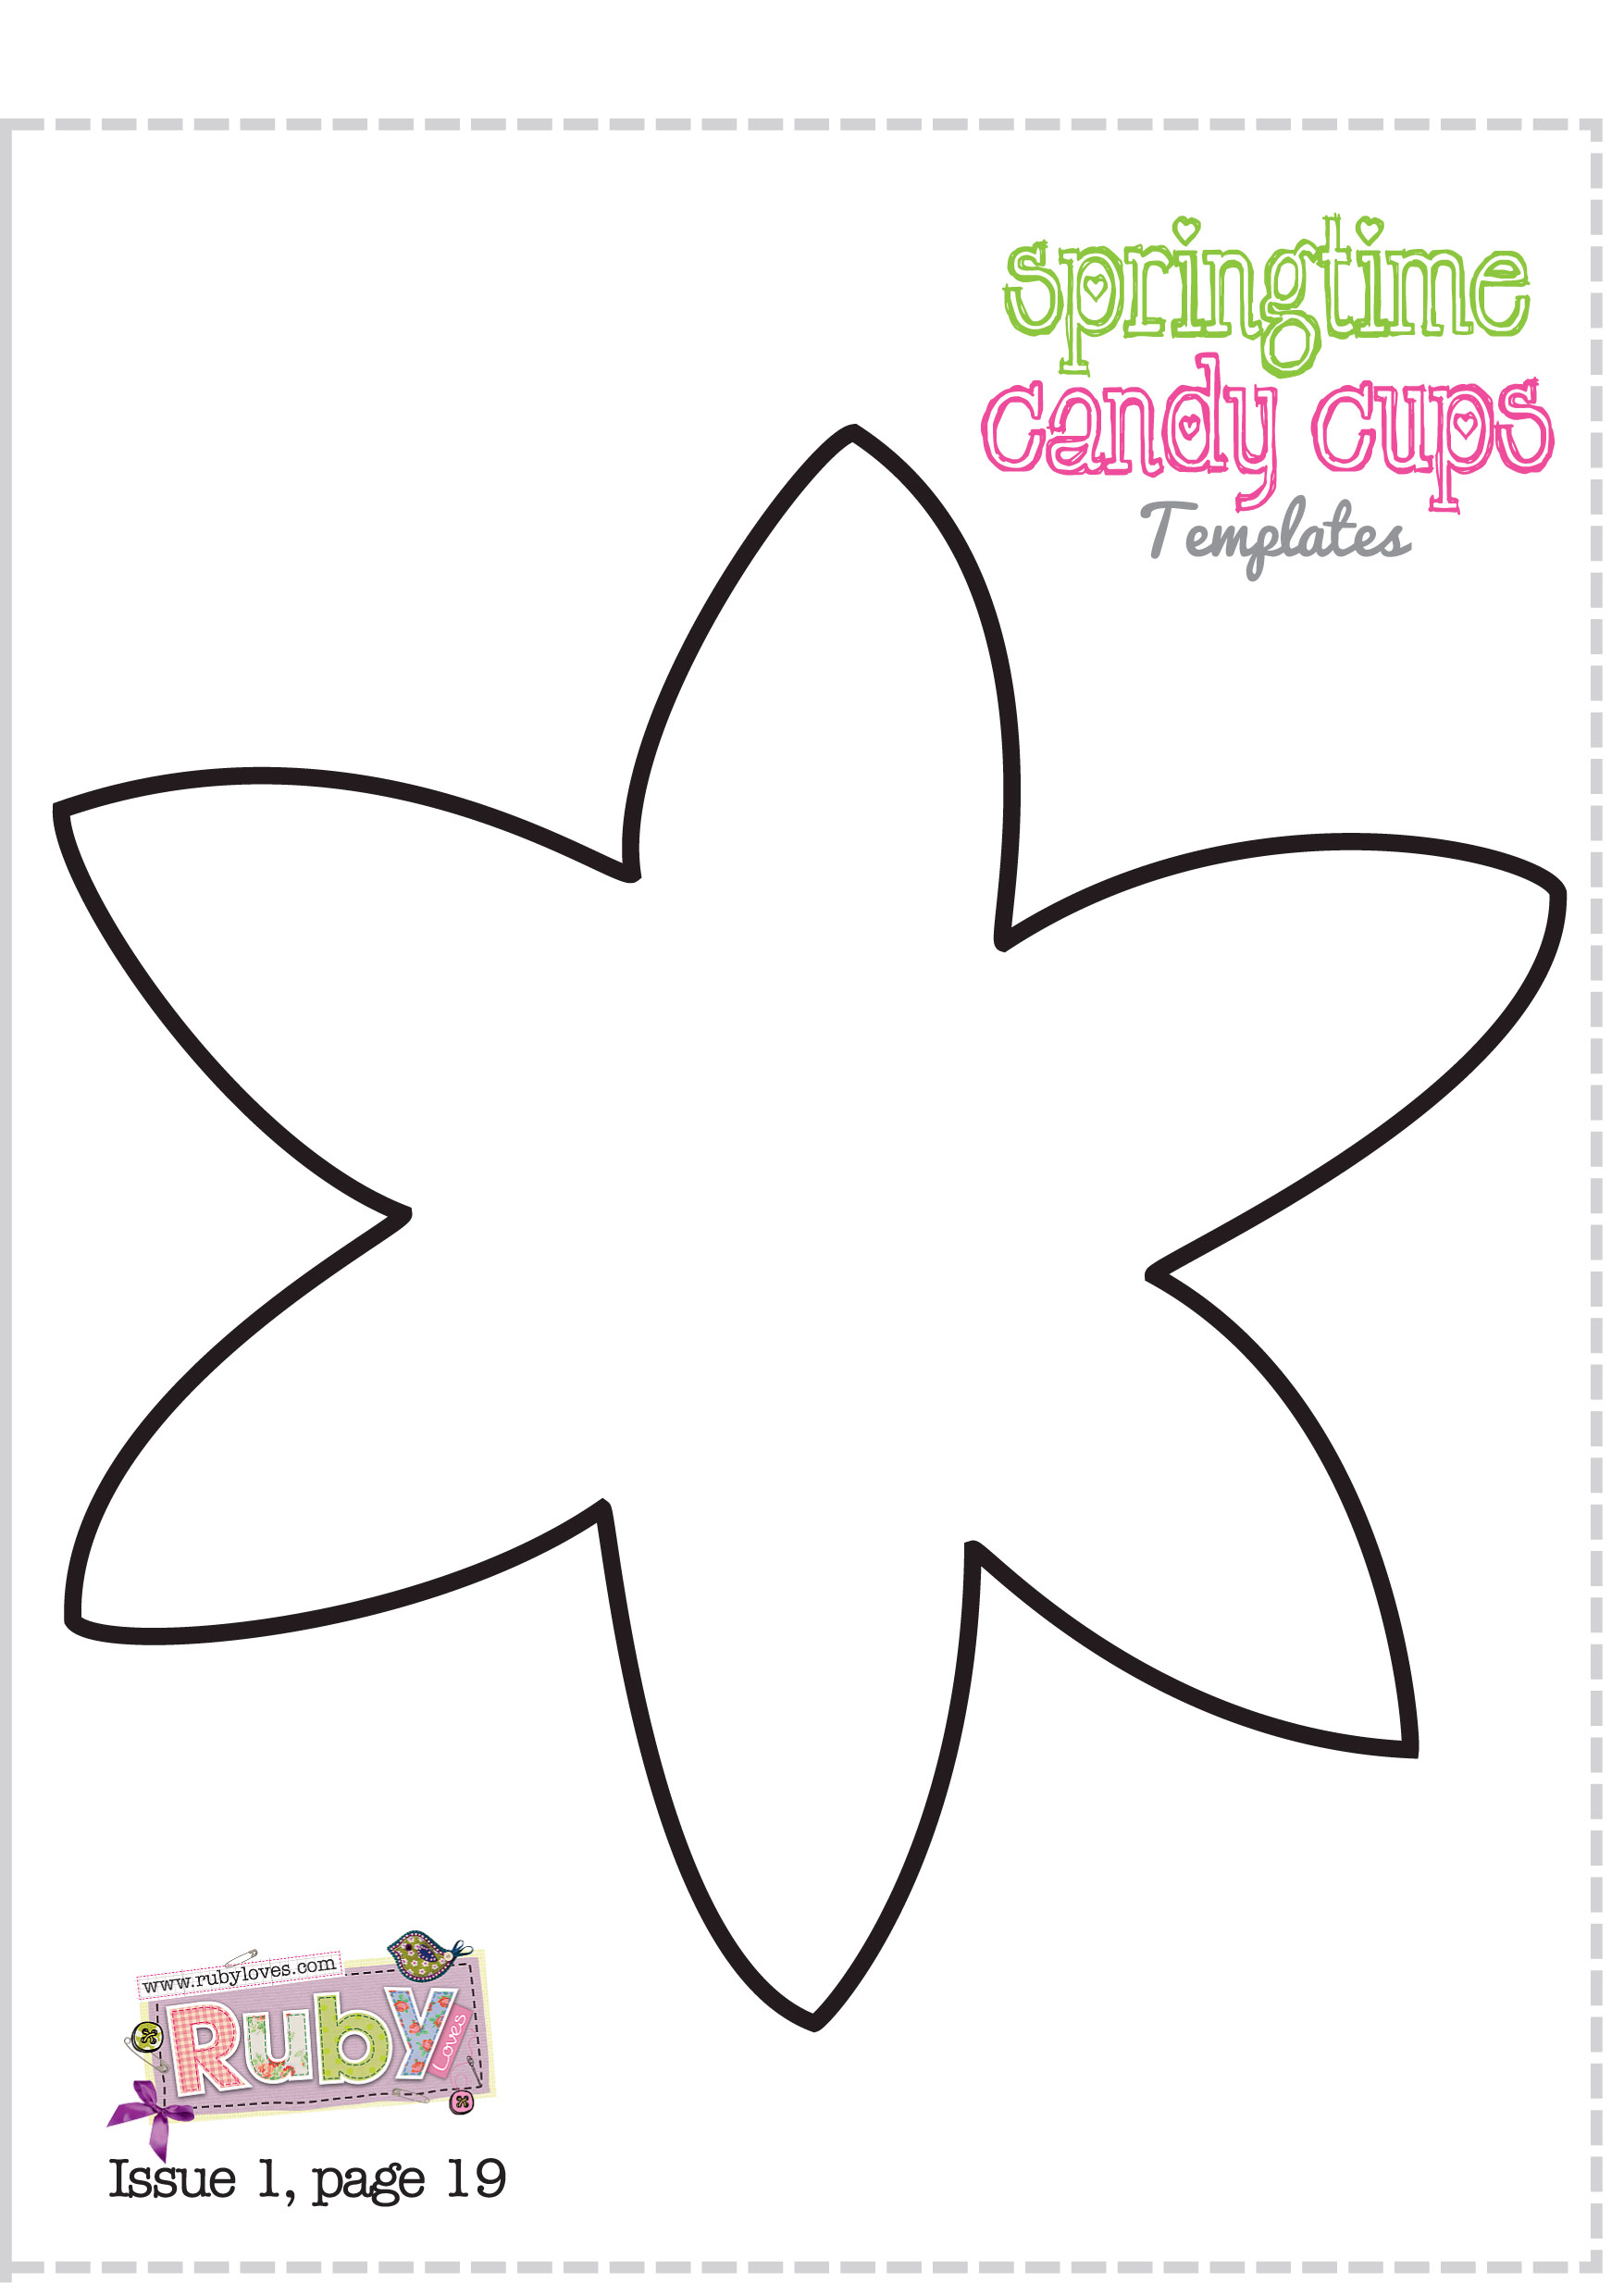 daffodil templates clipart best - daffodil template flowers templates ...